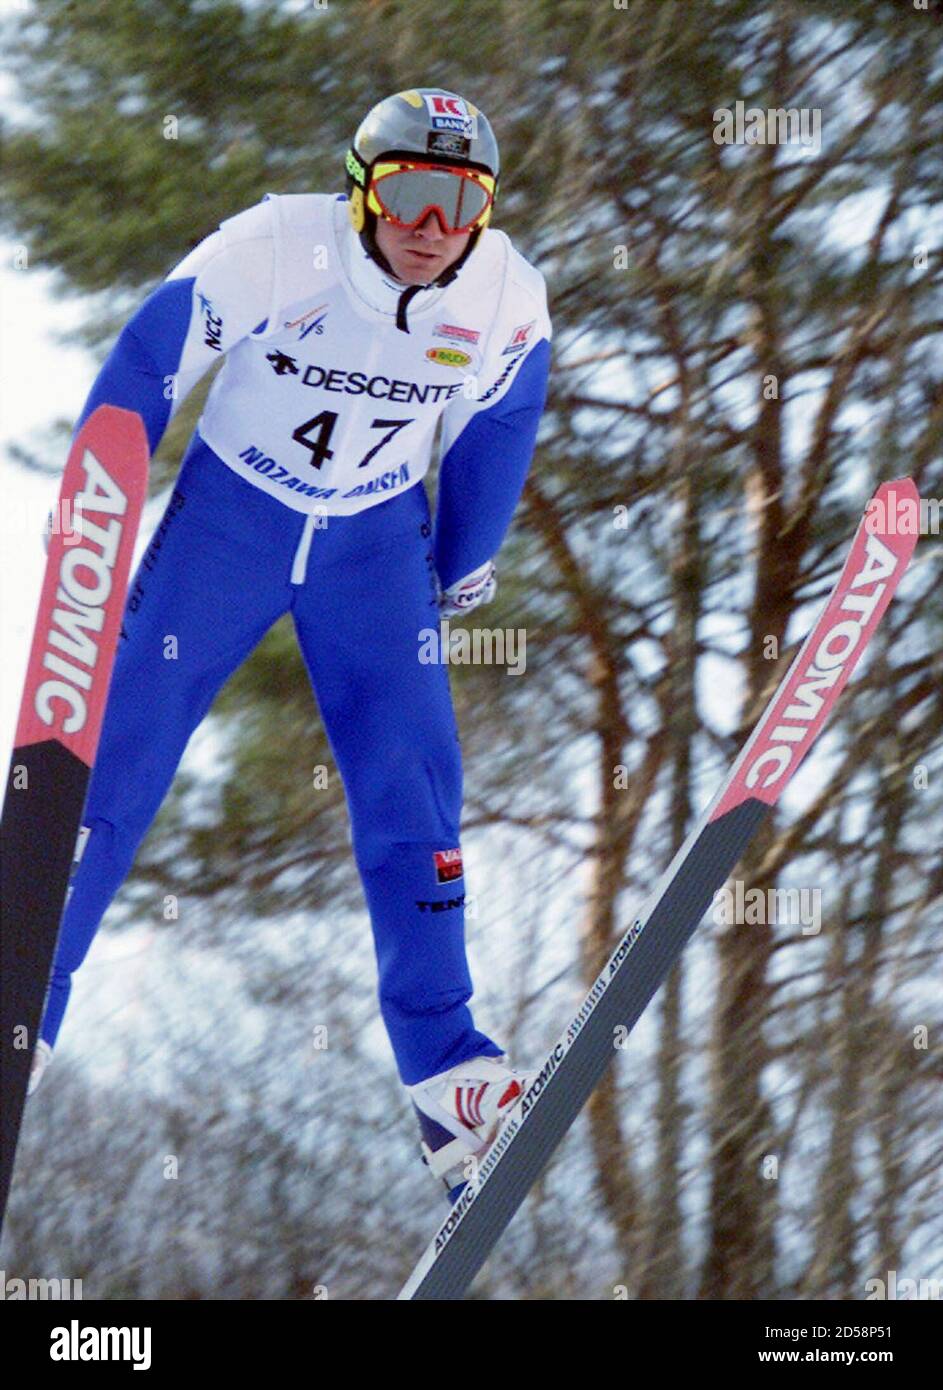 Norway's Bjarte Engen Vik in action during the individual competition of  the World Cup Nordic Combined ski jumping in Nozawa Onsen, northwest of  Tokyo February 8. Vik got 109.0 points in the